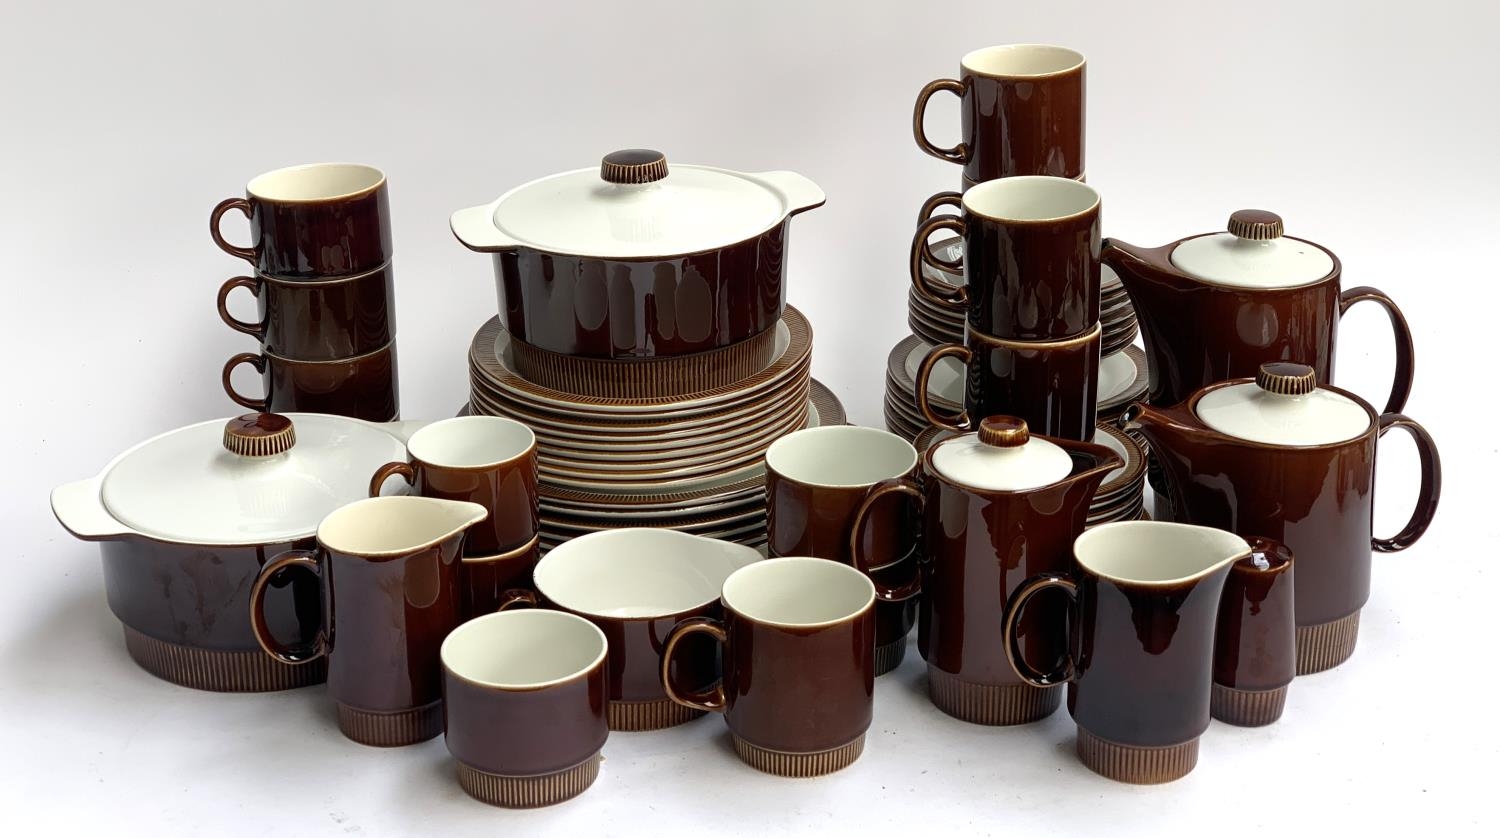 A Poole Pottery treacle glazed dinner service to include lidded tureen, teapot, coffee pot, dinner